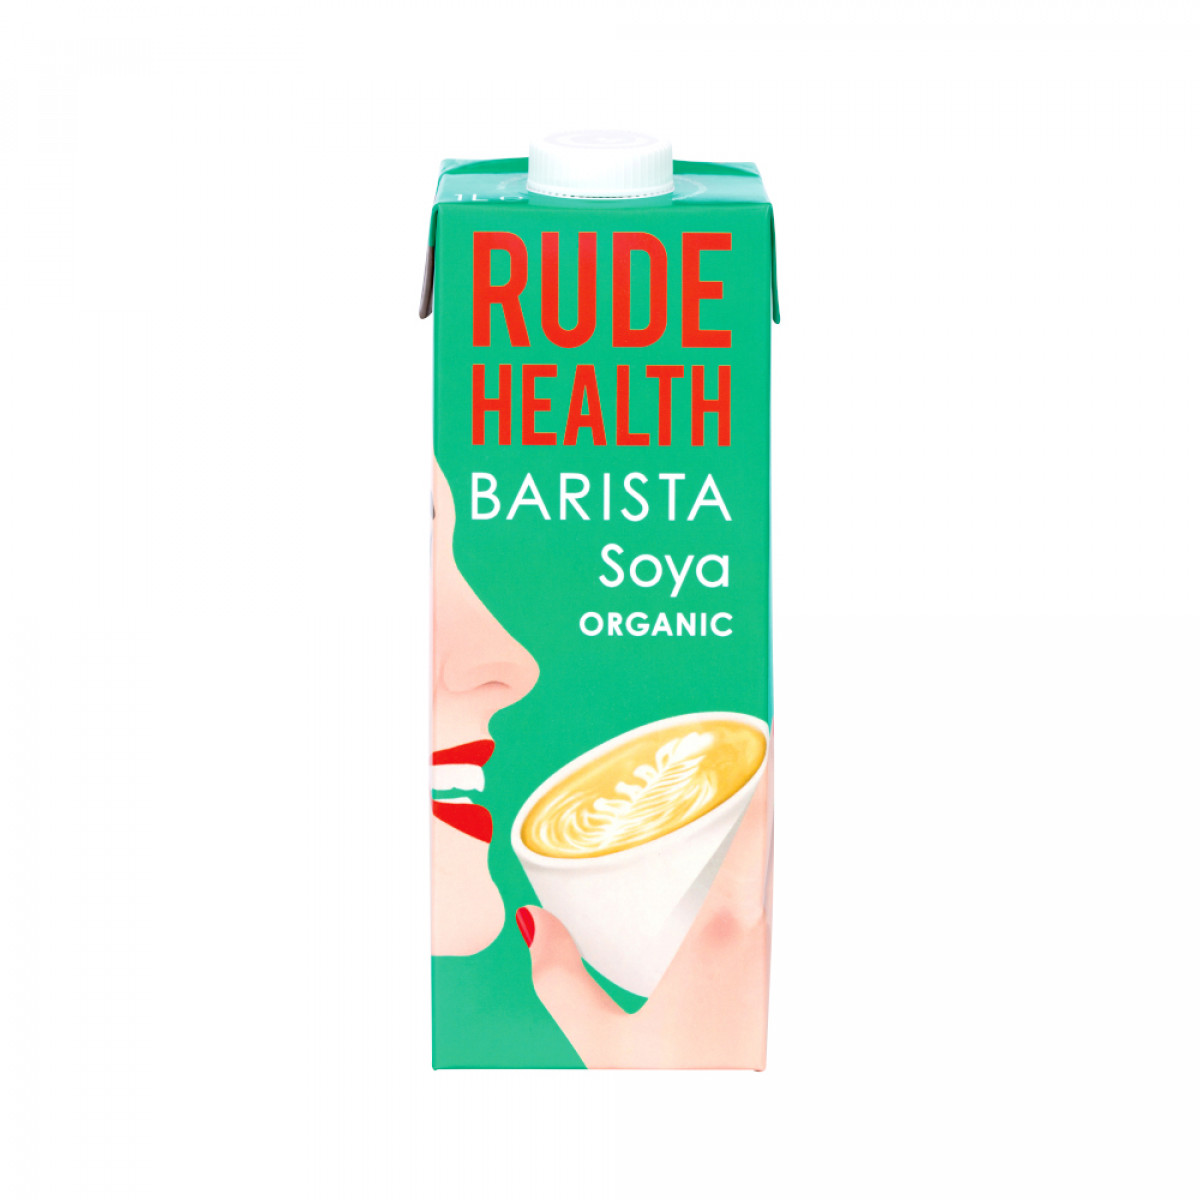 Product picture for Soya Barista Drink